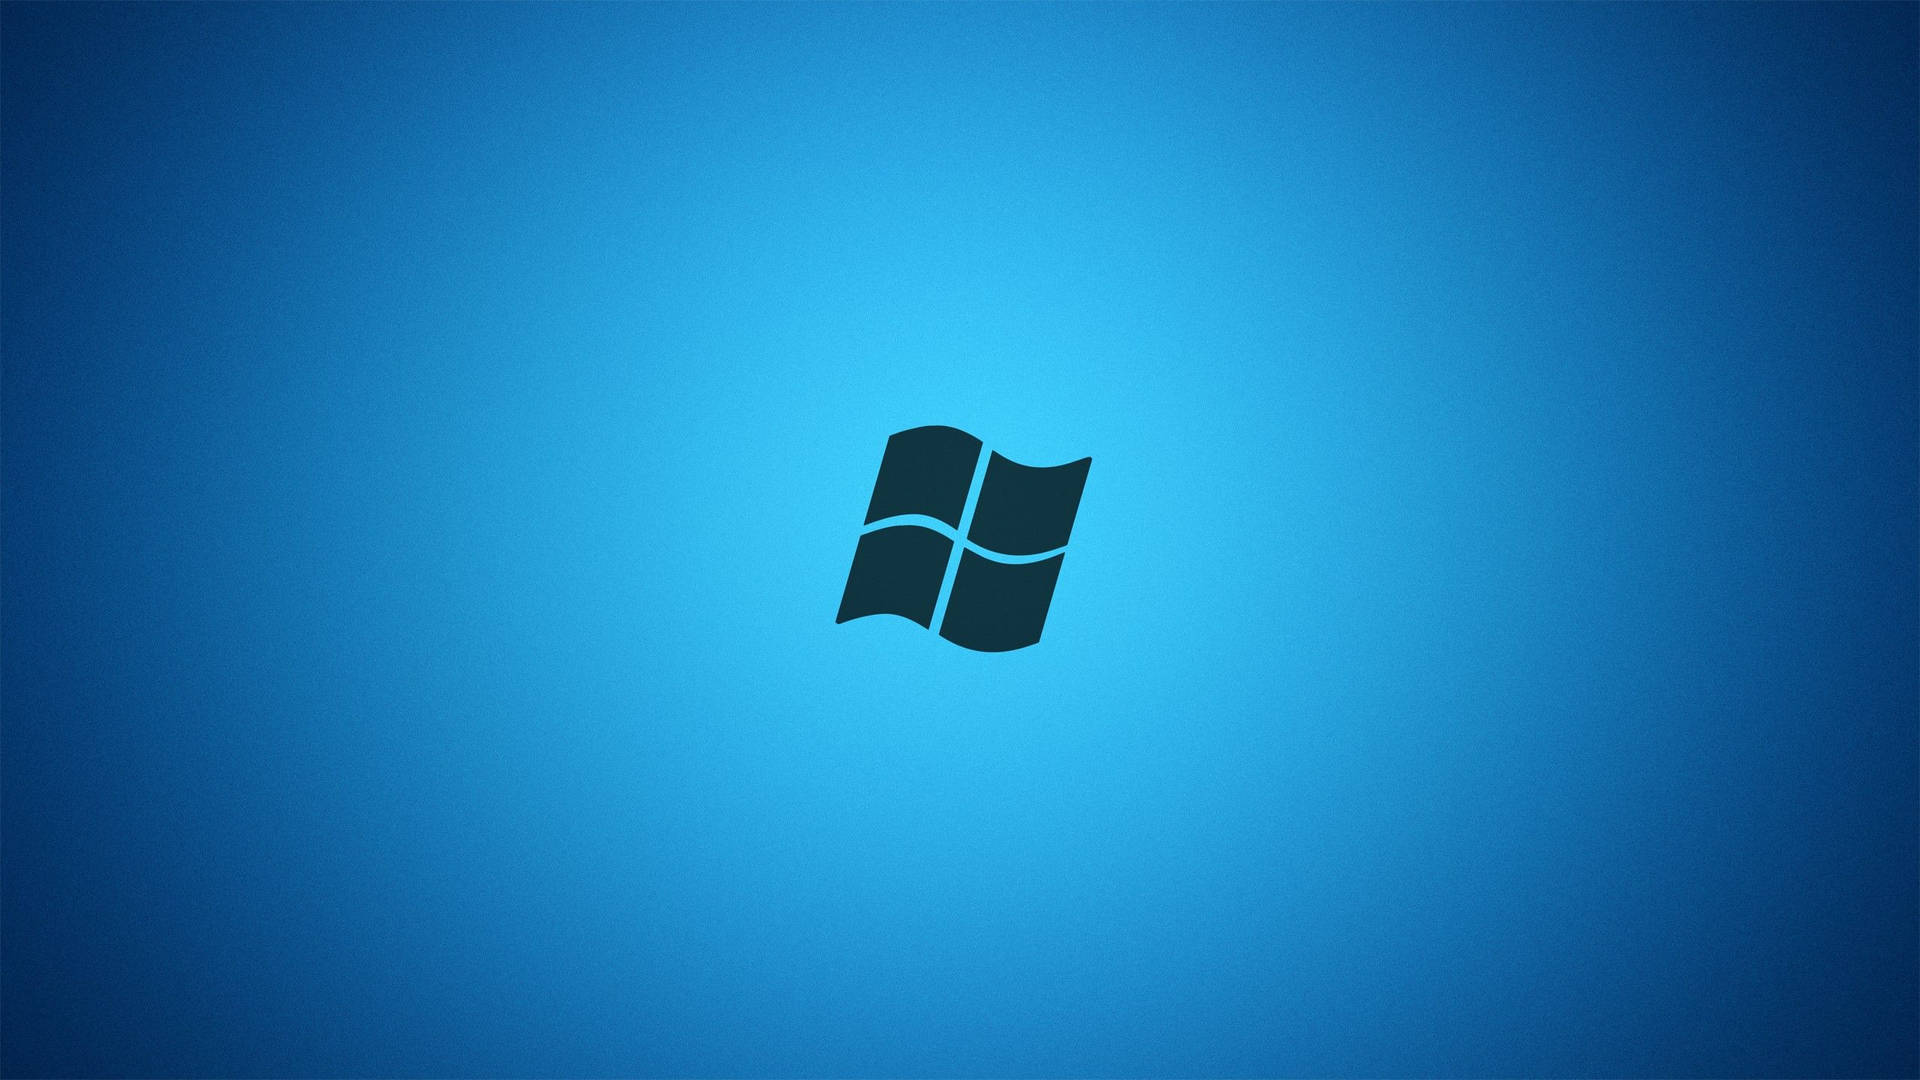 175 Windows Wallpapers & Backgrounds